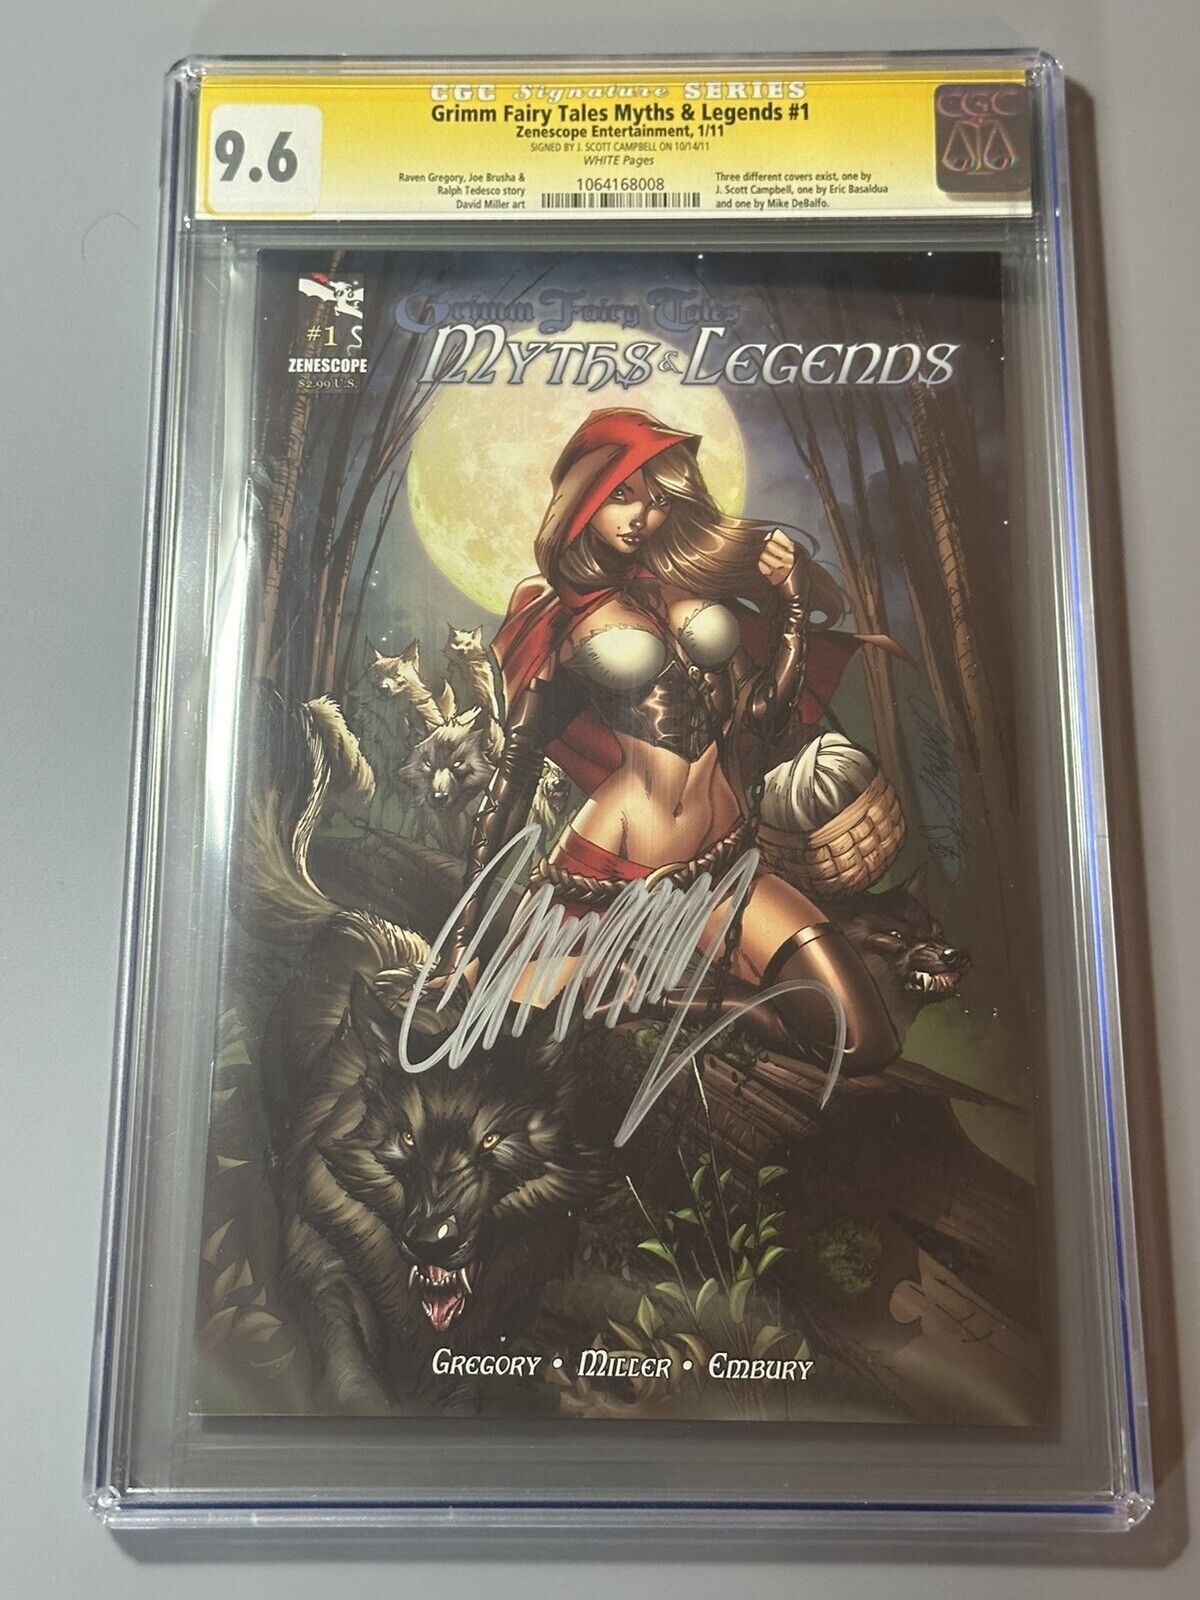 GFT Myths and Legends 1A - CGC SS 9.6 - Signed by J. Scott Campbell (2011)